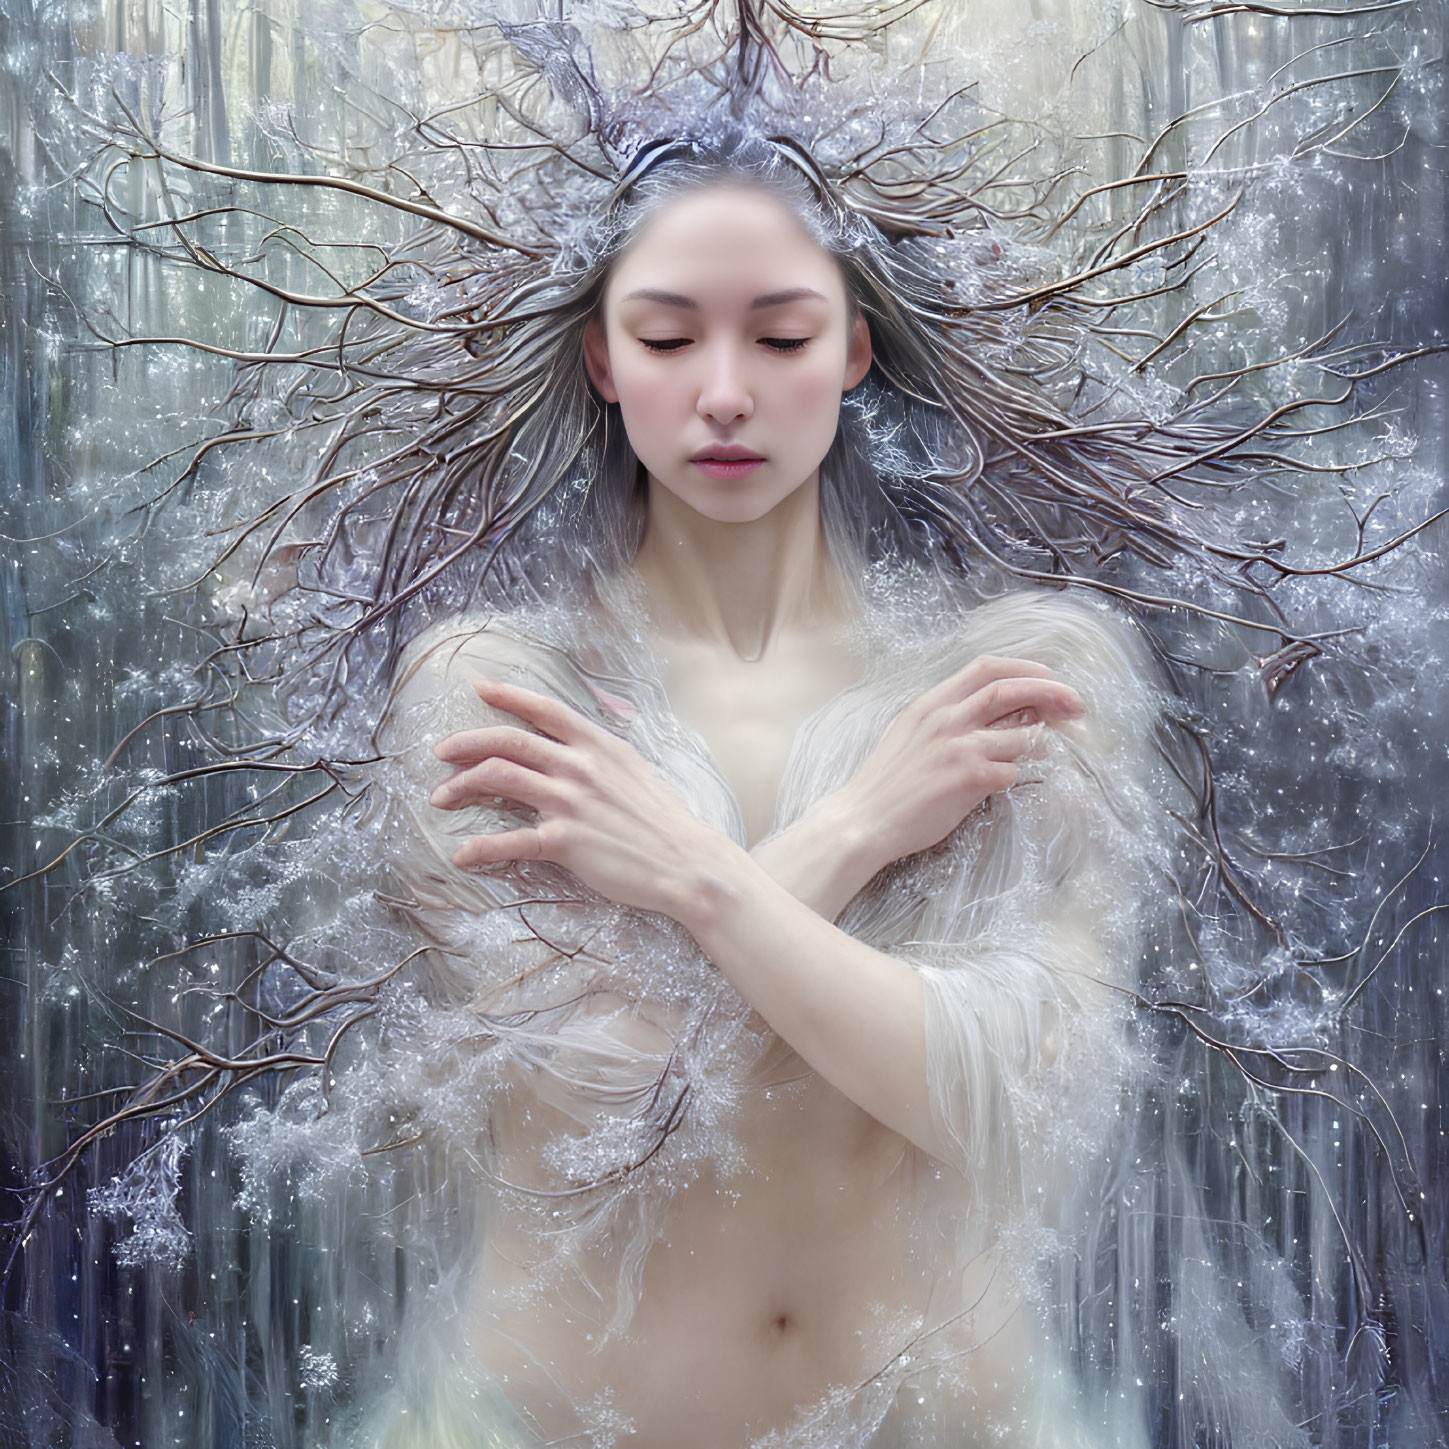 Mystical figure with tree branch hair in wintry forest scene